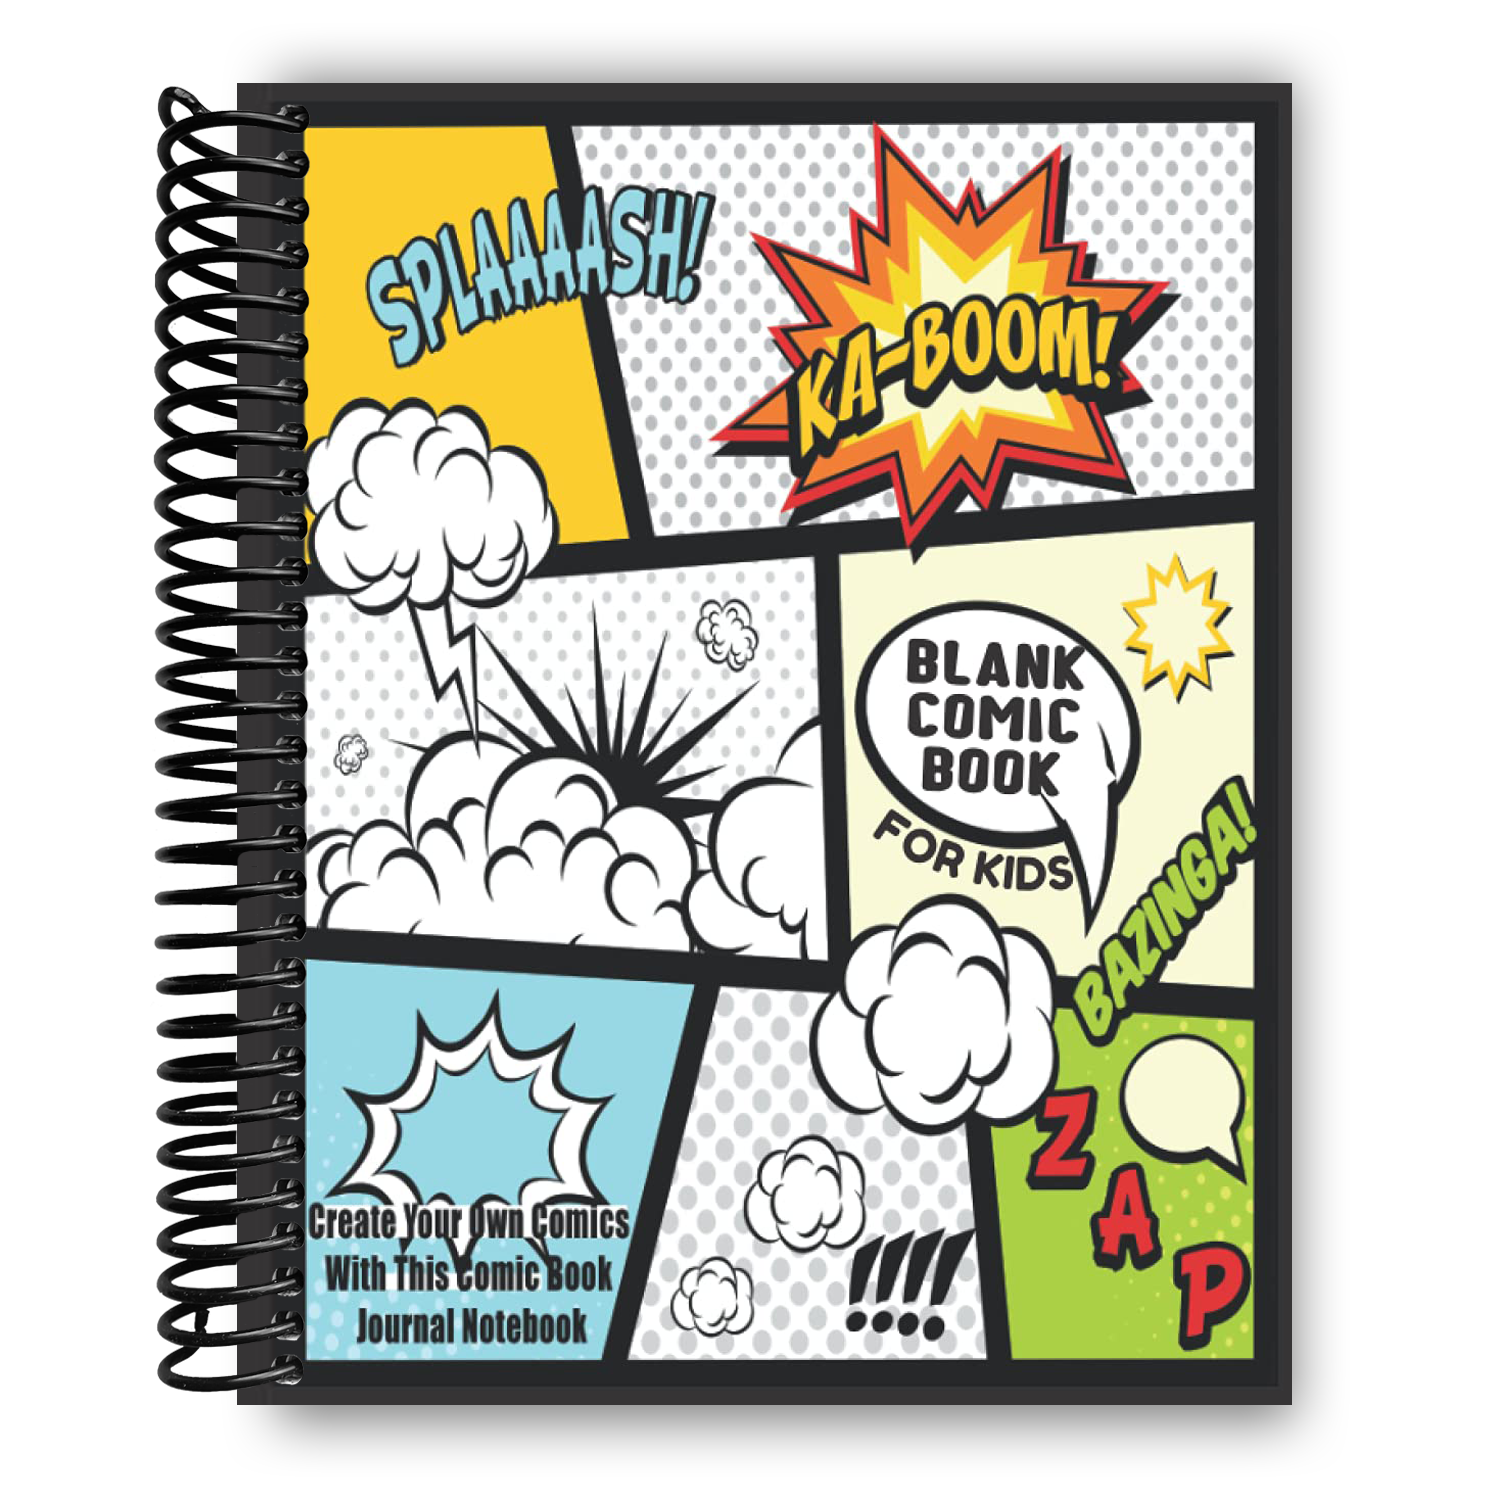 Paperback Blank Kid Books for Kids to Write Stories - Make Your Own Comic Book or Flipbook, Draw, illustrate, Create Small Recipe, Diary Journals 32